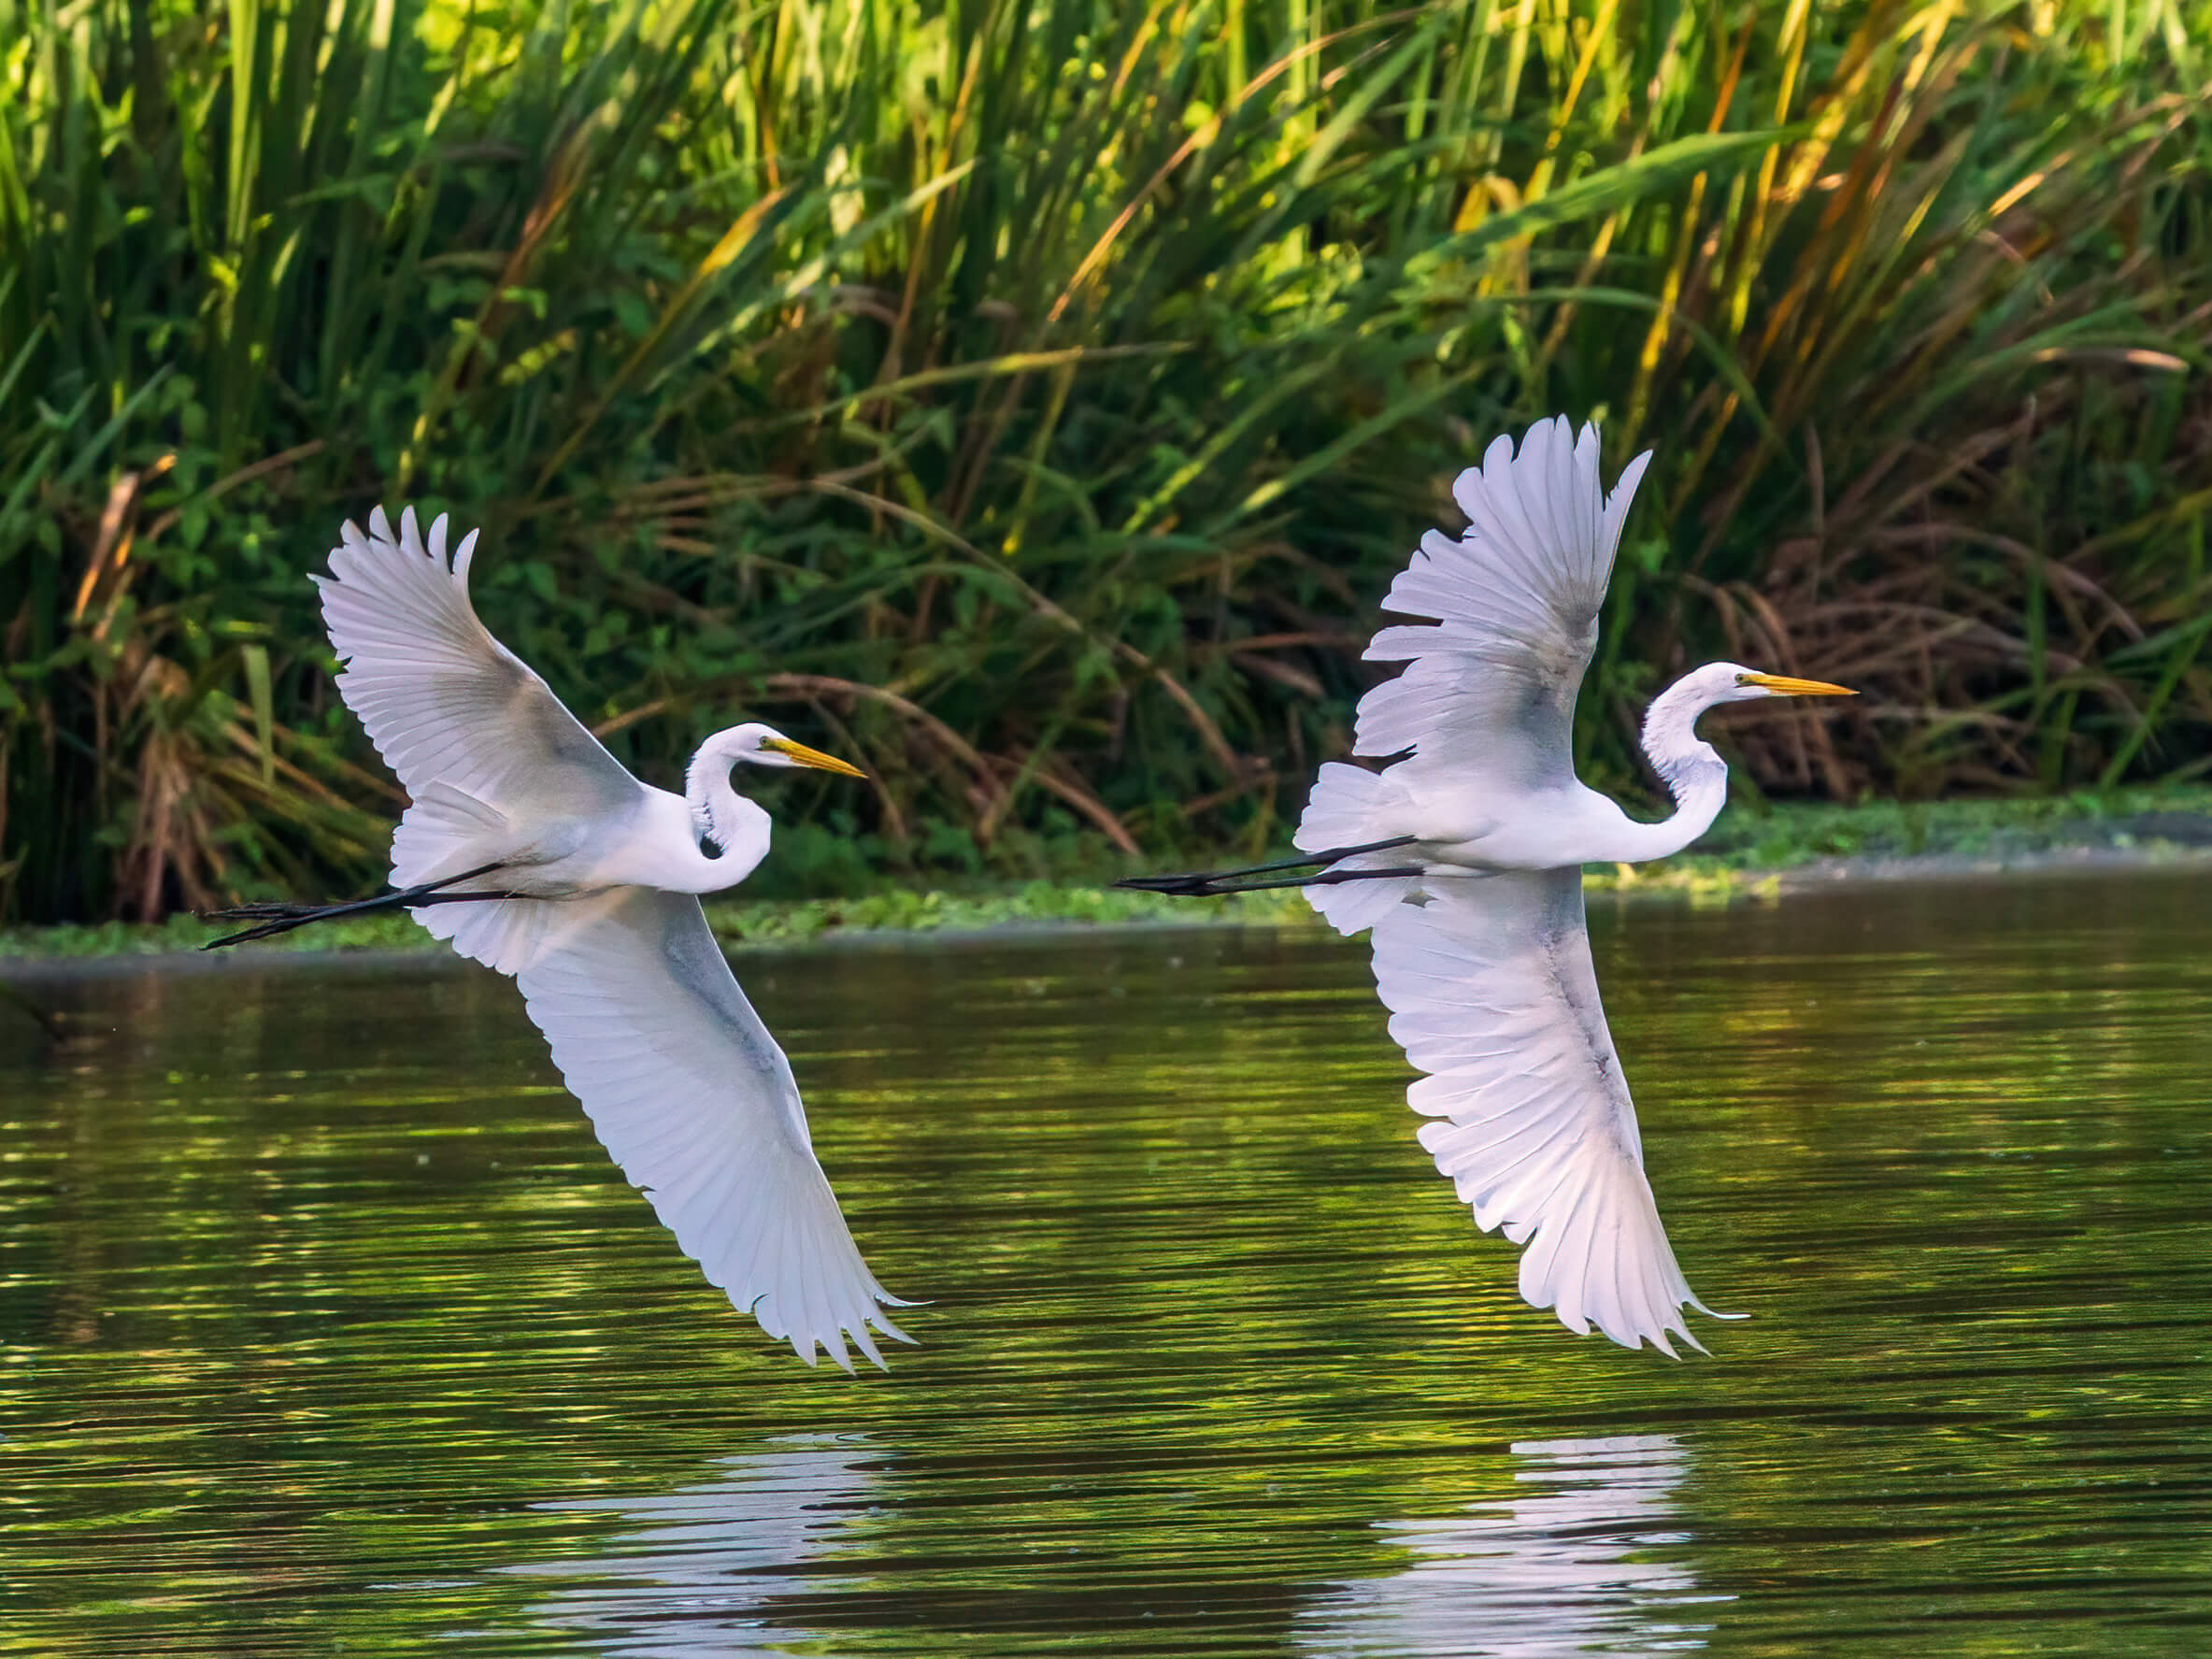 Two great egrets fly in sync over water.